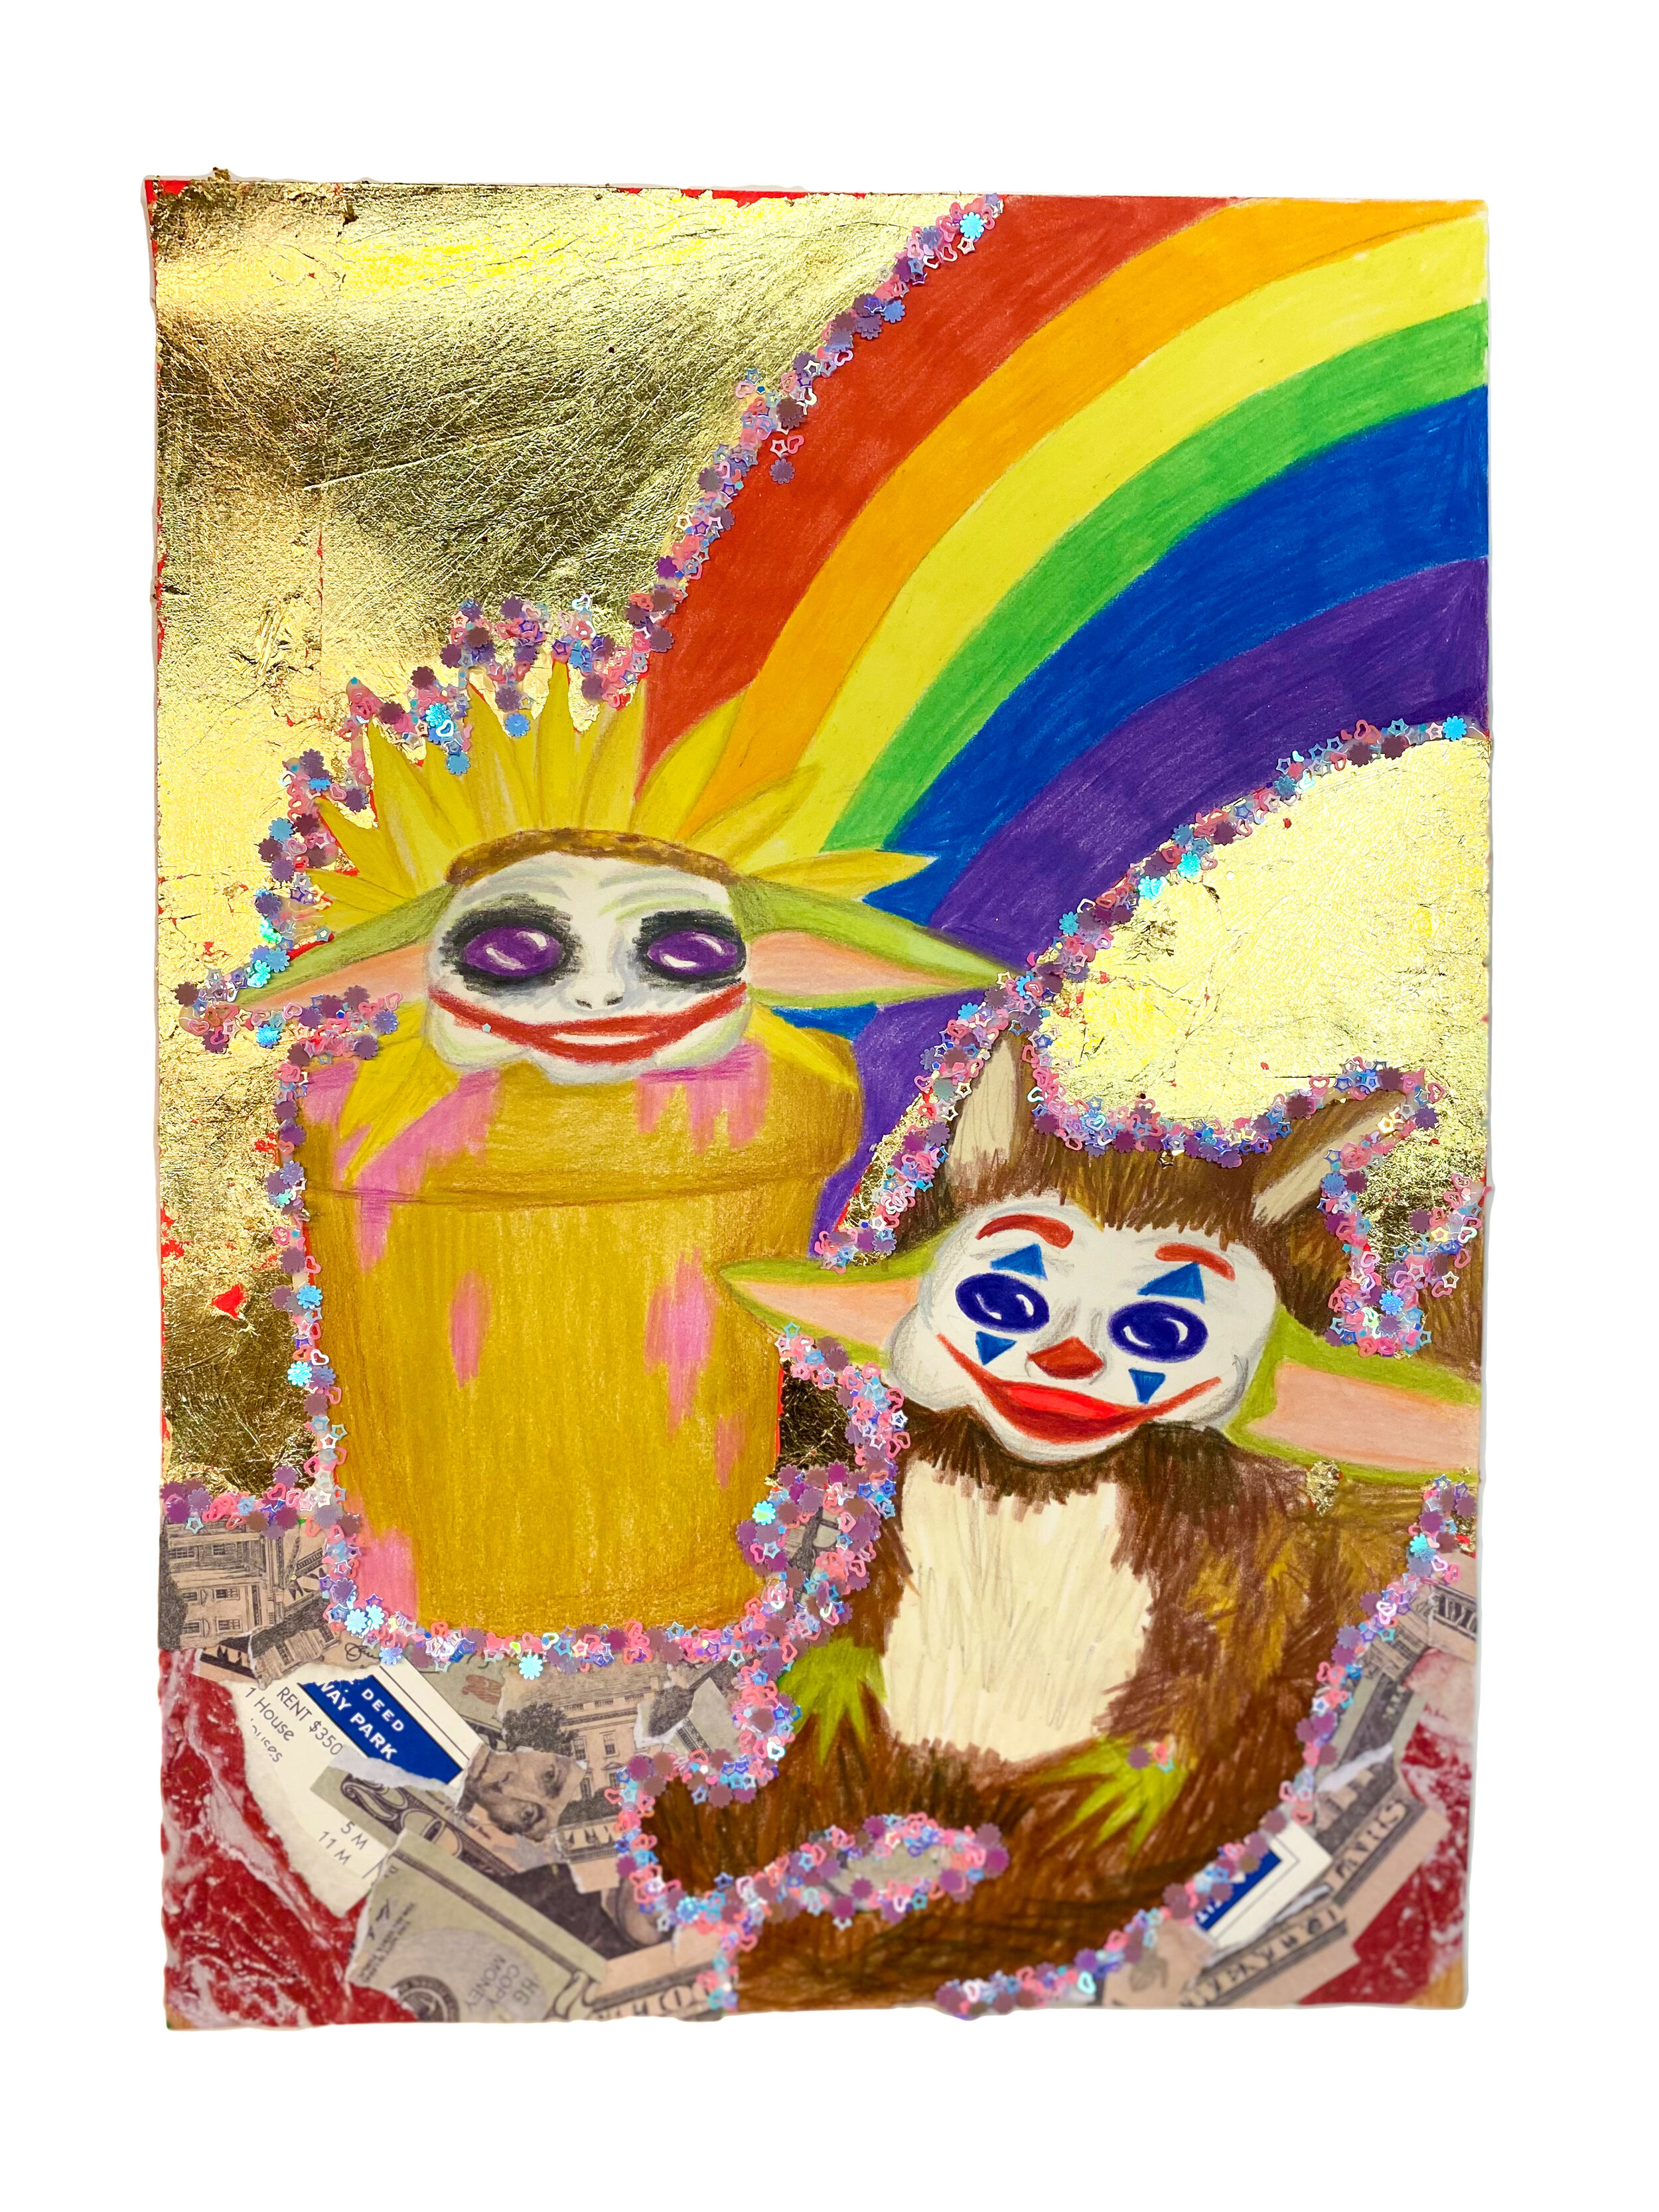   Anne Geddes Joker Grogu , 2021  14 x 10 inches (35. 56 x 25.4 cm.)  Colored pencil, gold leaf, Elmer's glue, Modge Podge, pictures of meat, acrylic paint, money, glitter, and Monopoly cards on paper 